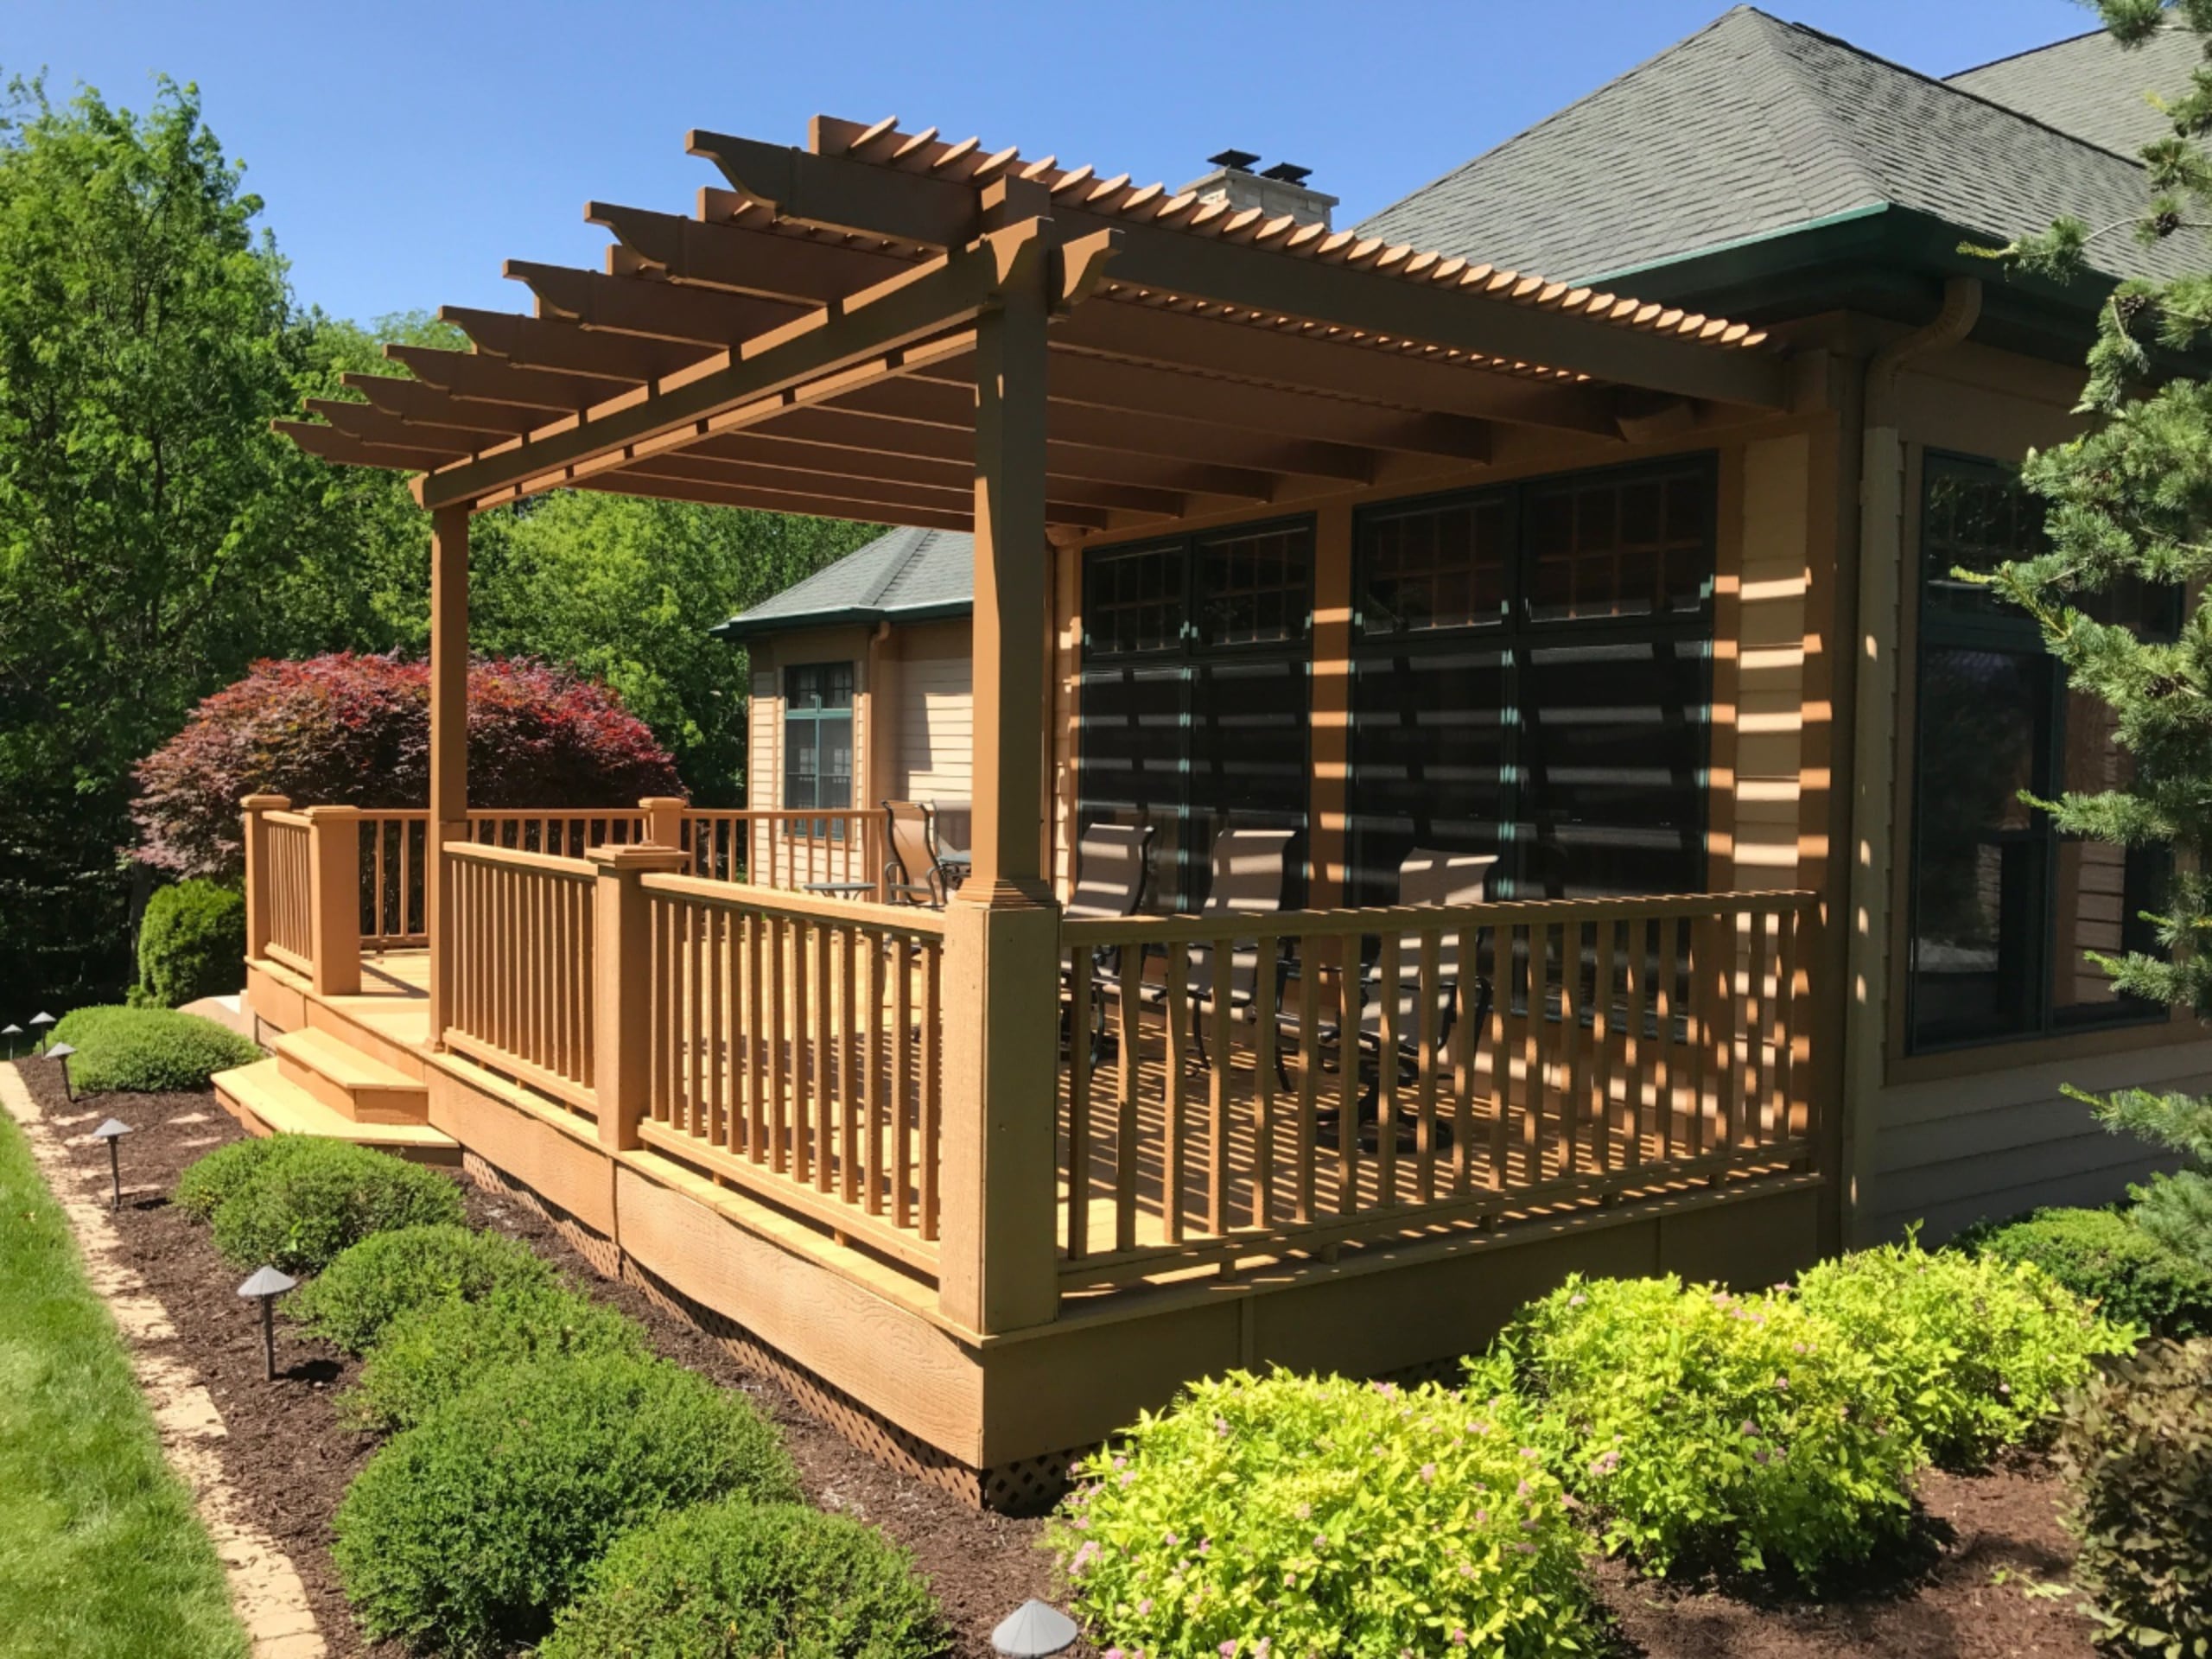 This brown house has a painted brown pergola covering half of the porch. There are green bushes around the porch with brown mulch.